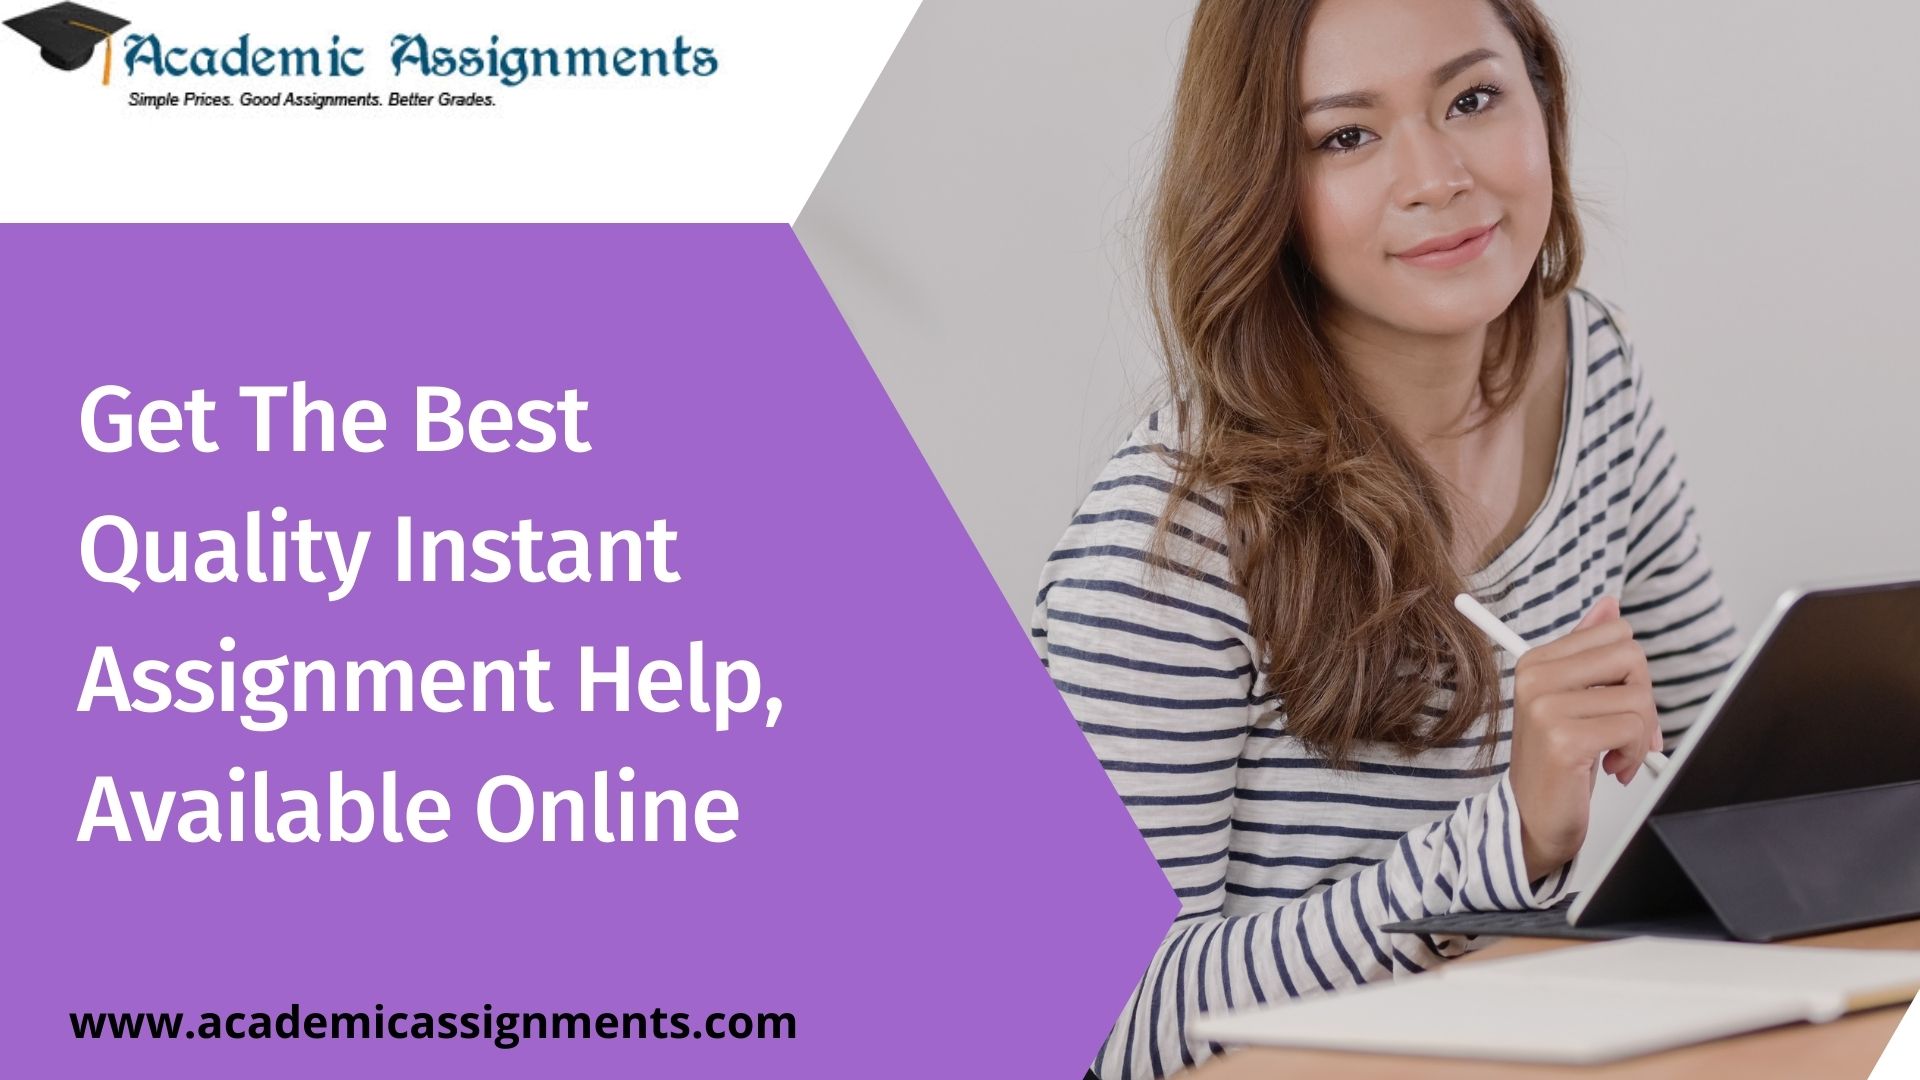 Get The Best Quality Instant Assignment Help